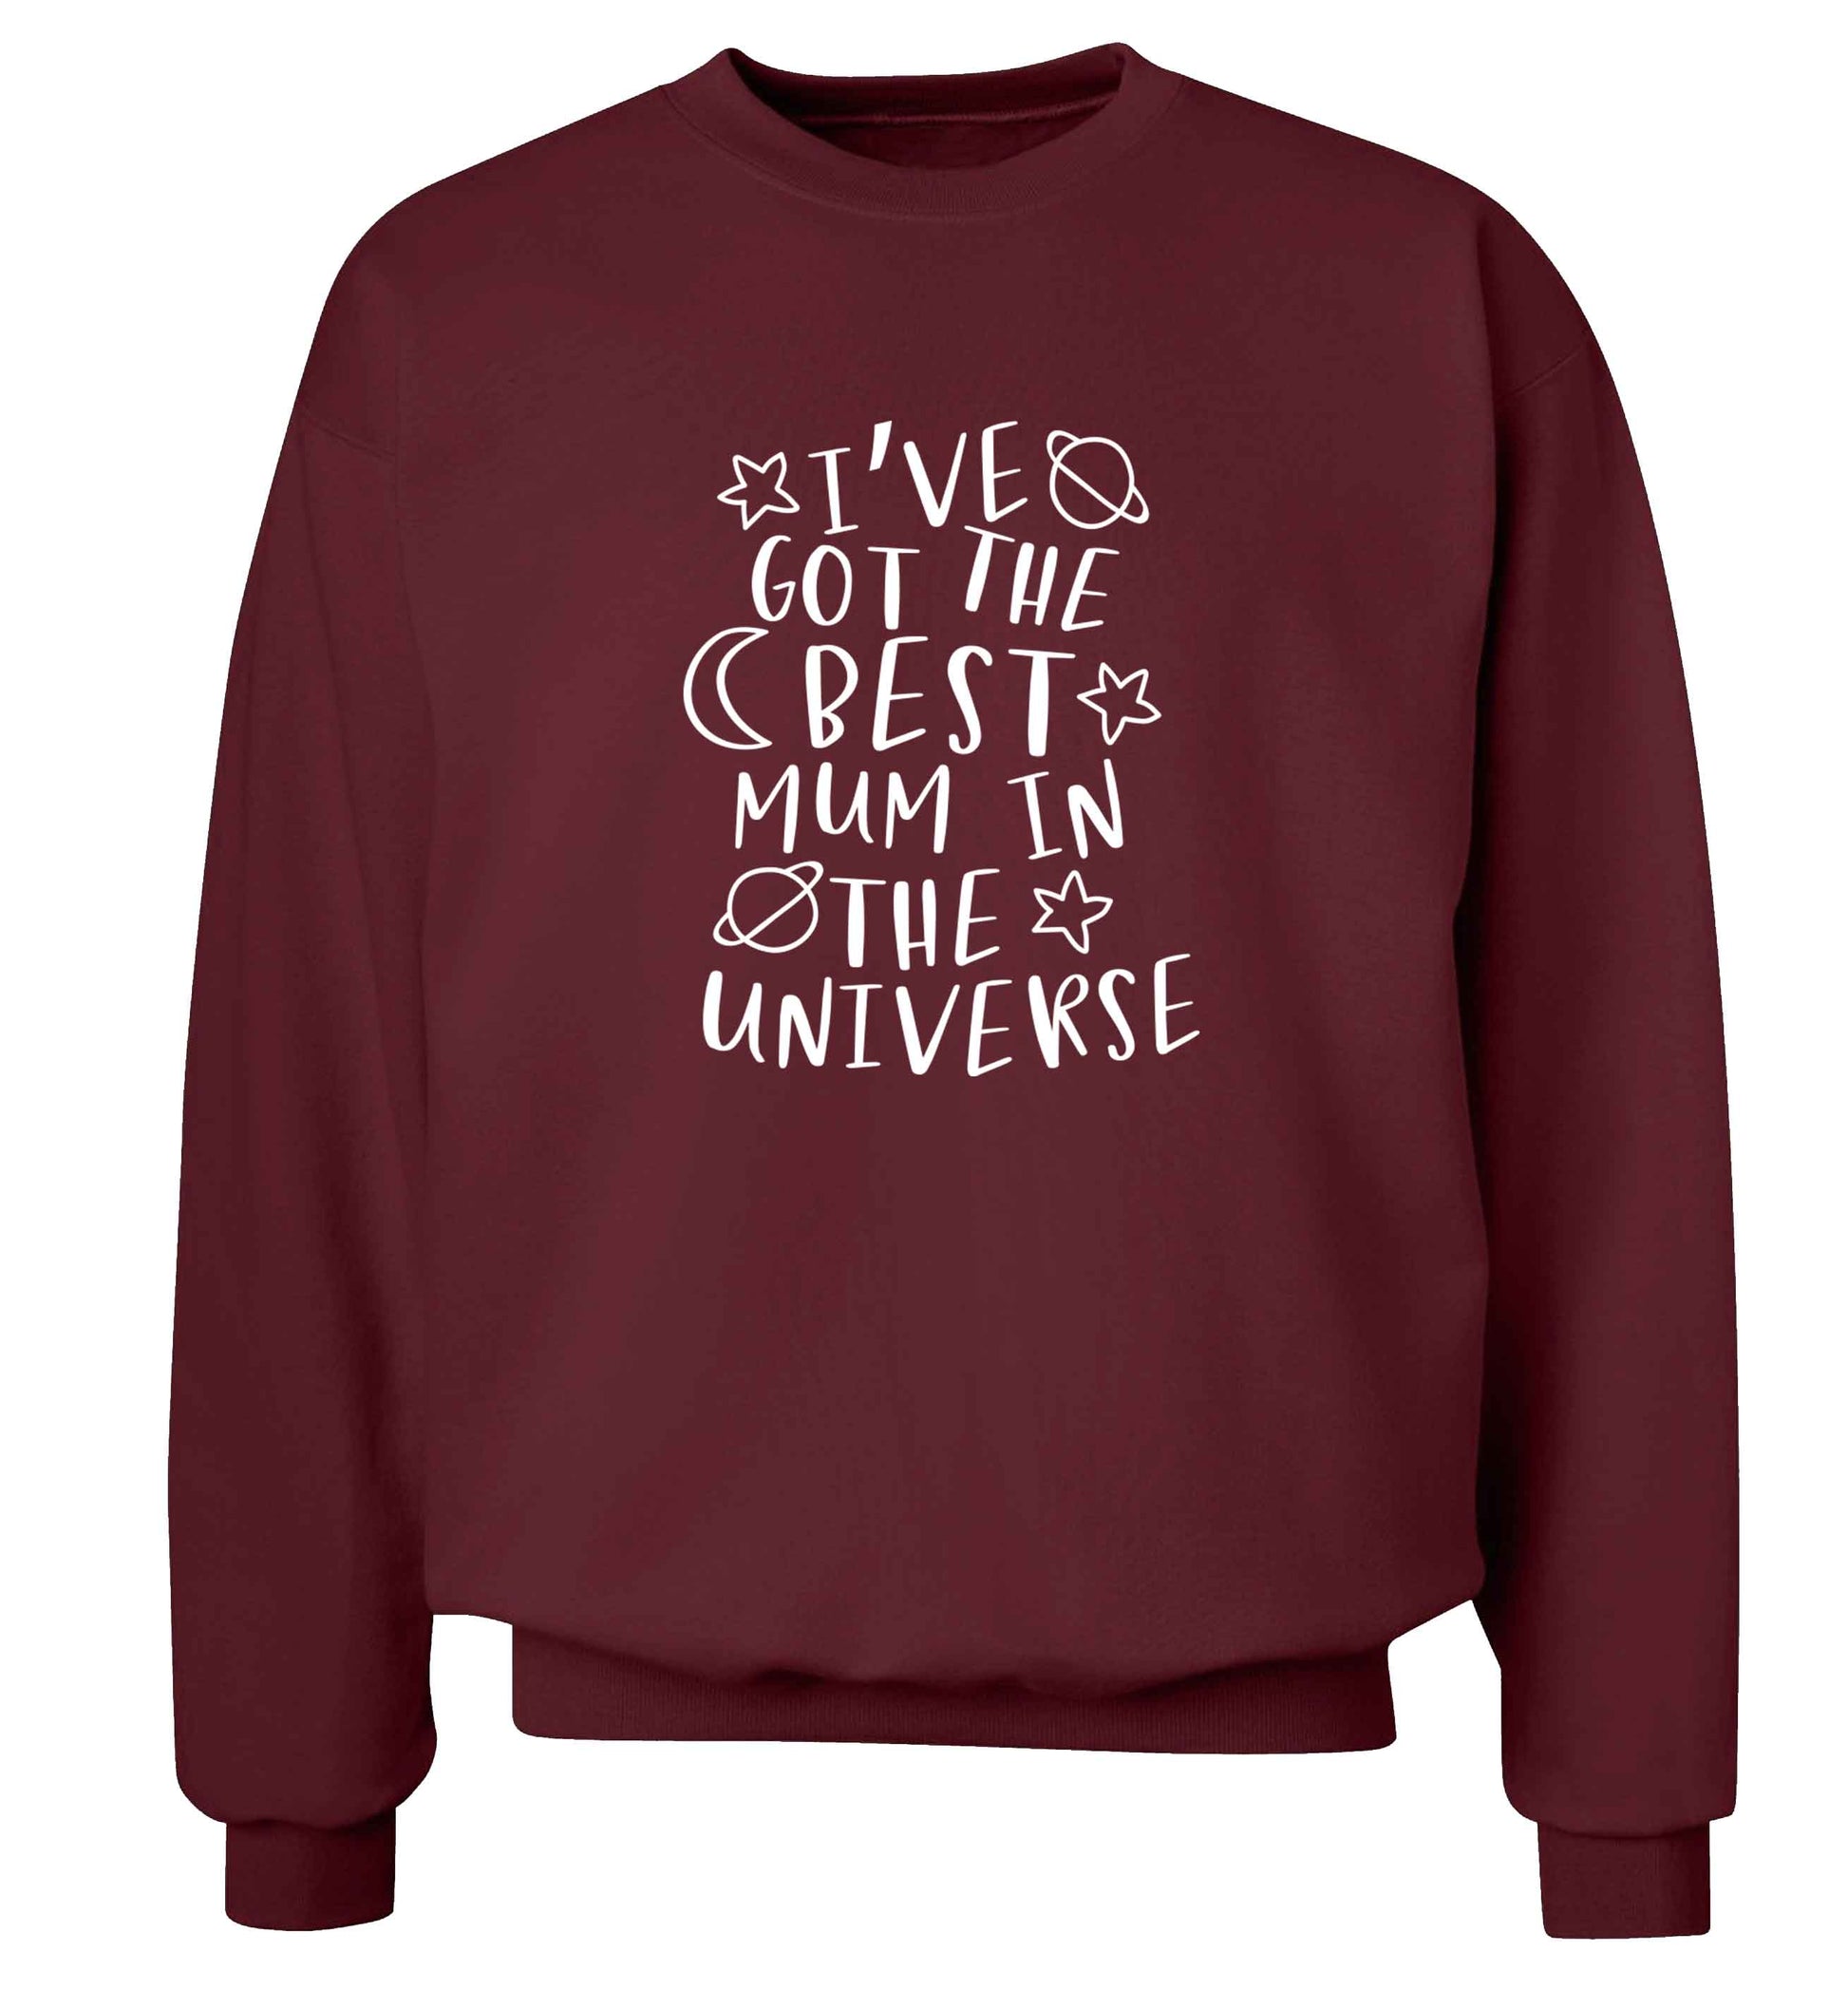 I've got the best mum in the universe adult's unisex maroon sweater 2XL